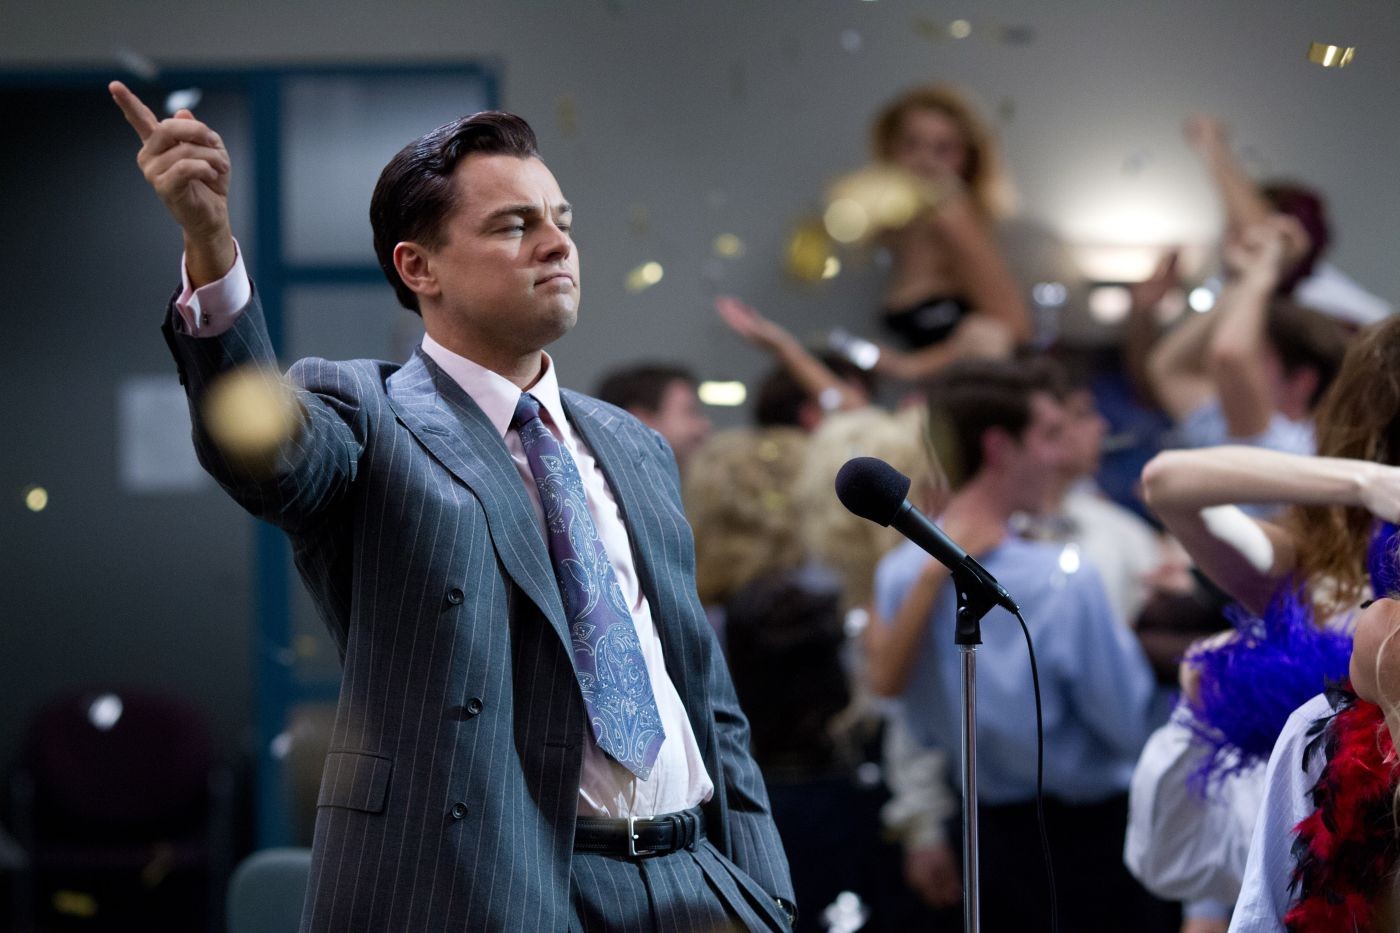 New Trailer: ‘The Wolf Of Wall Street’